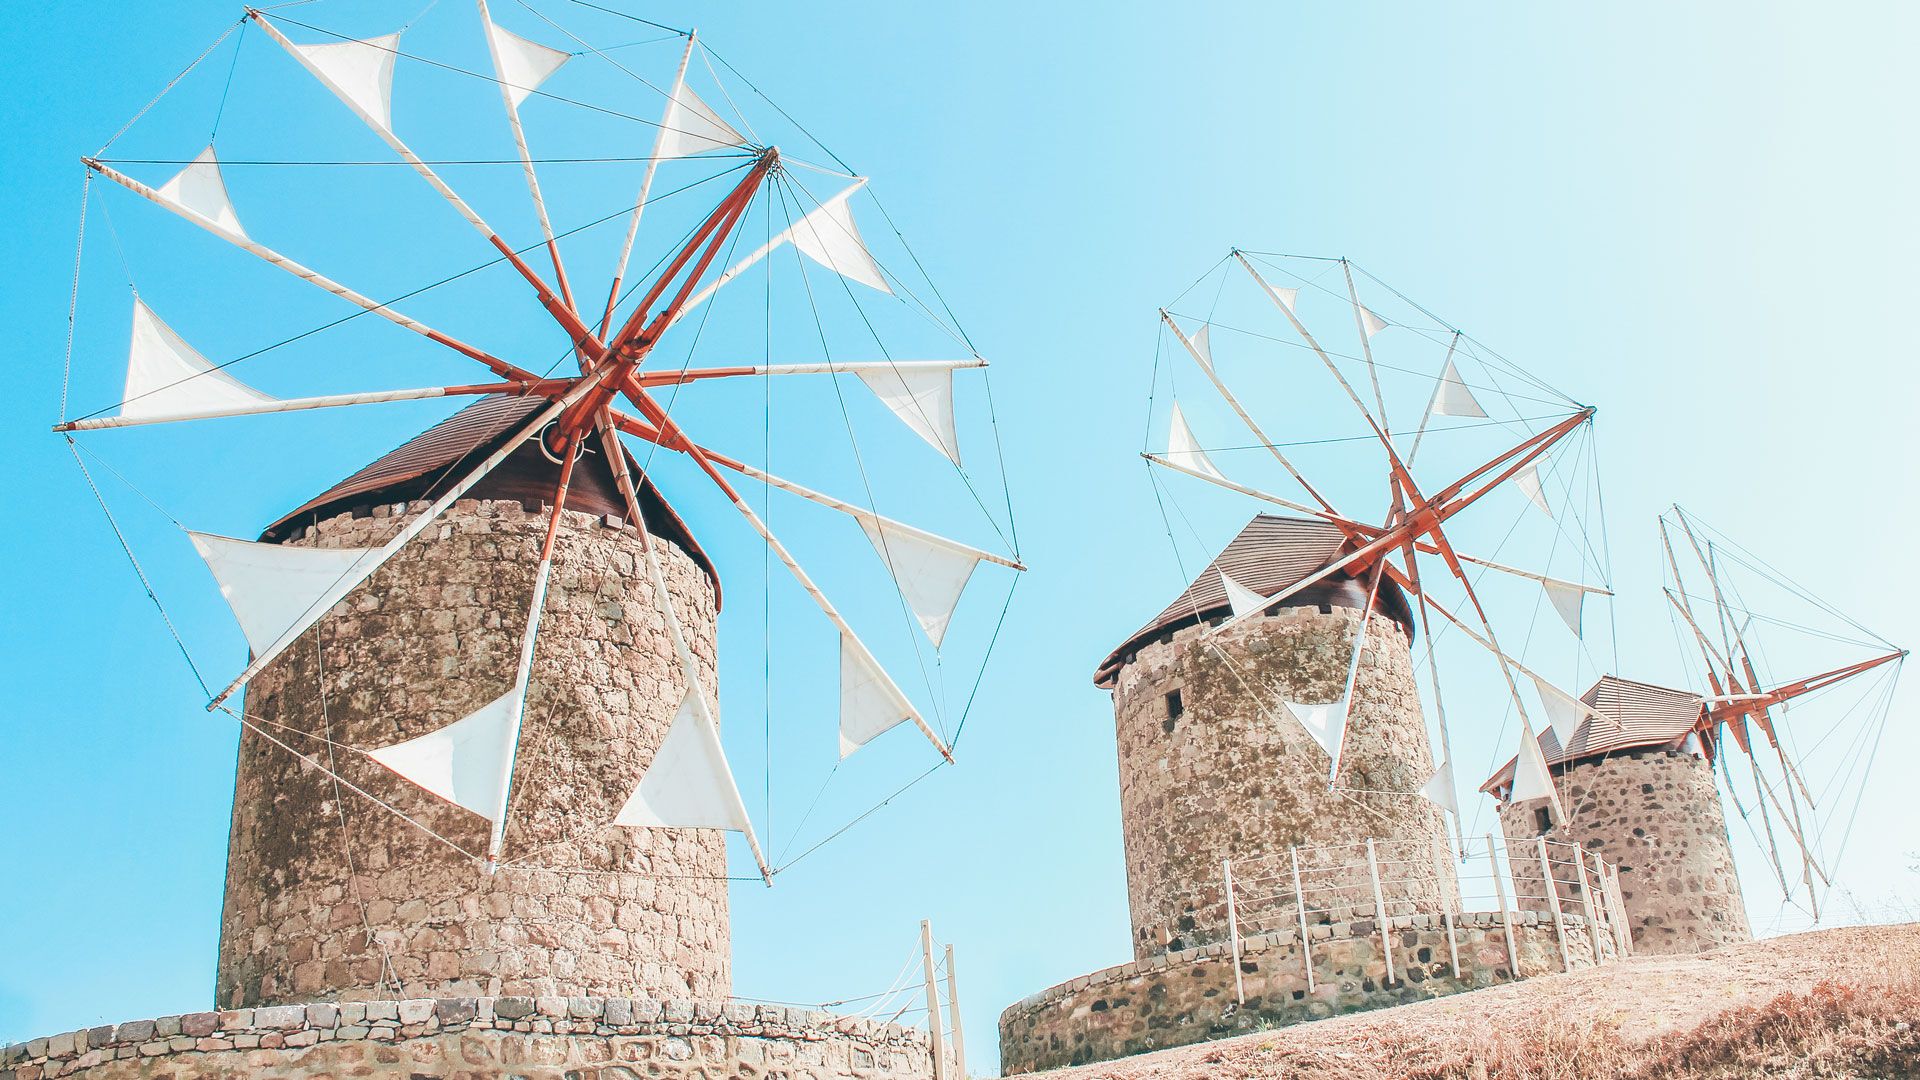 The windmills of Hora